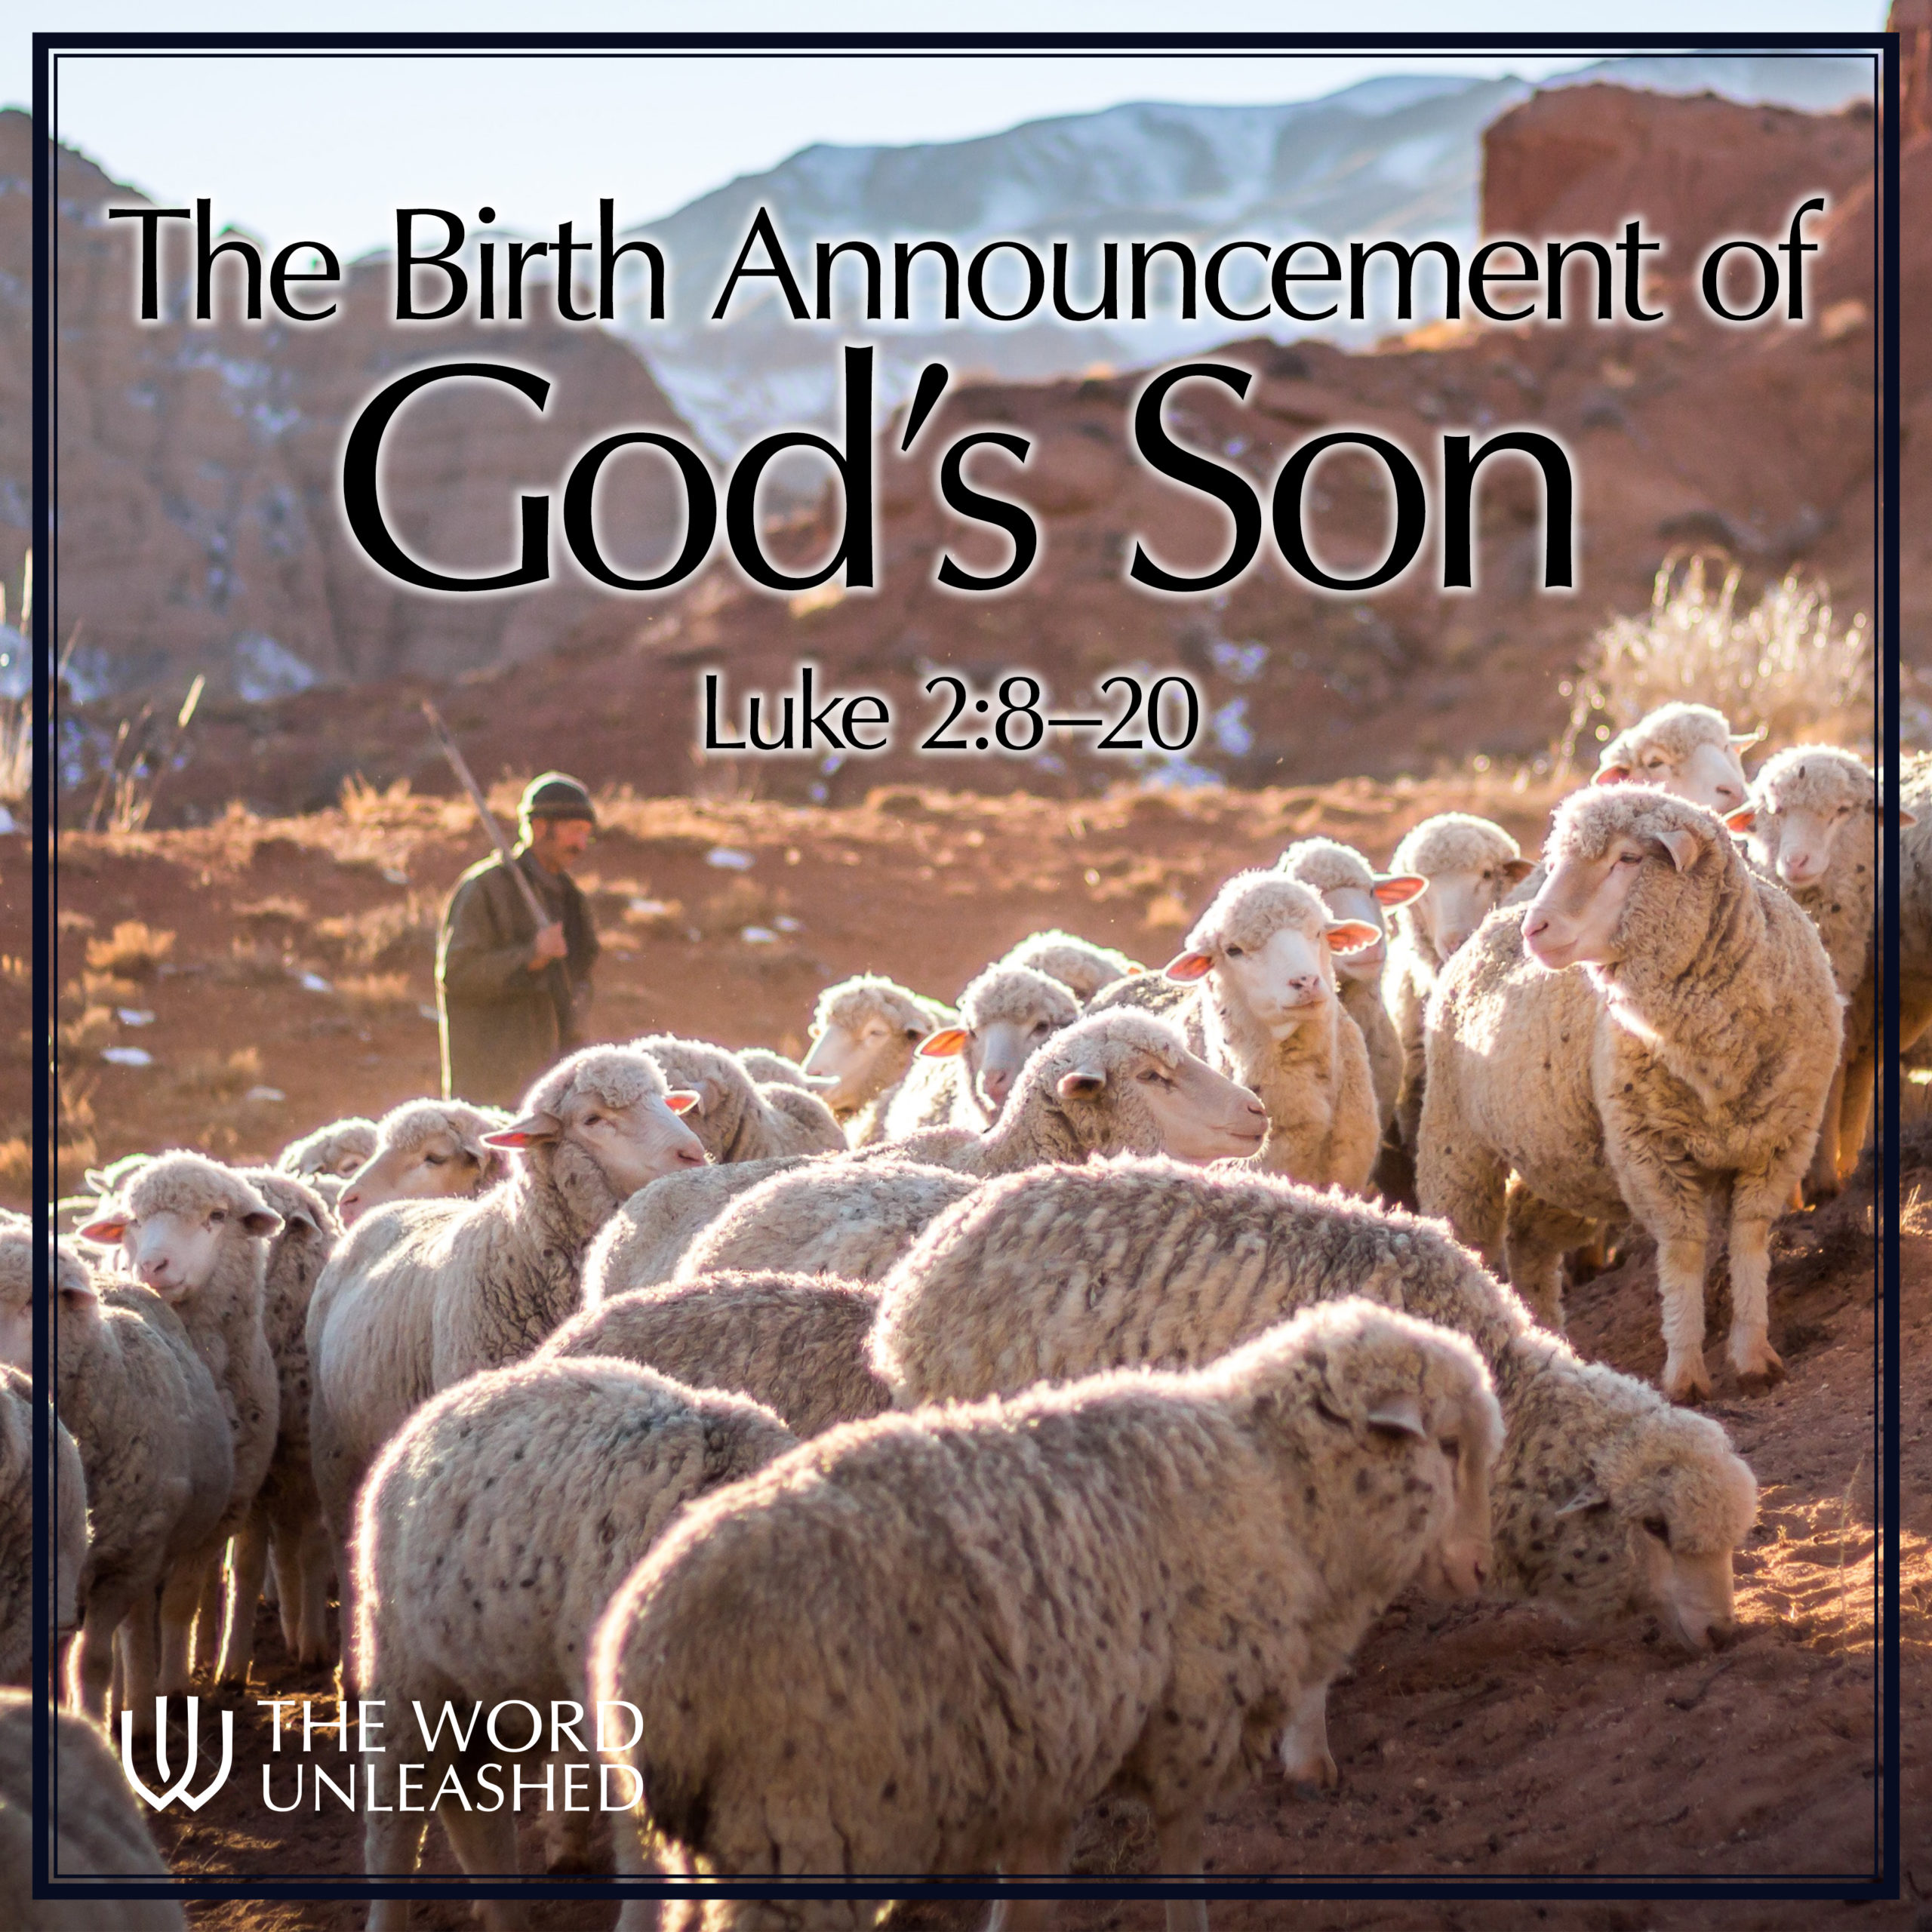 The Birth Announcement of God's Son